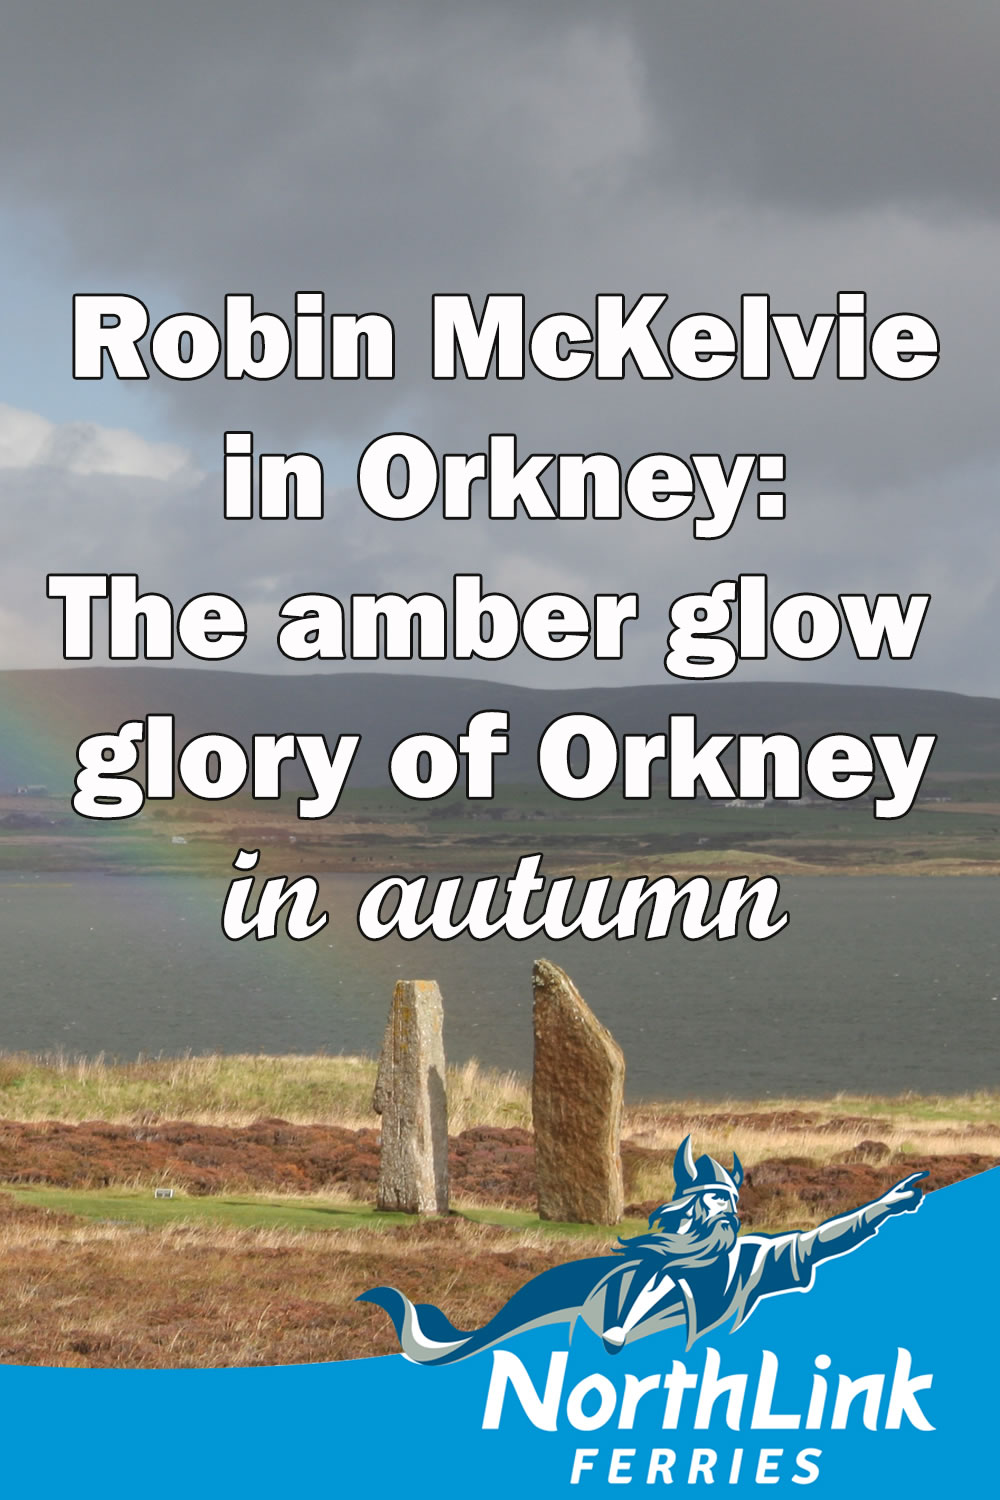 Robin McKelvie in Orkney: The amber glow glory of Orkney in autumn